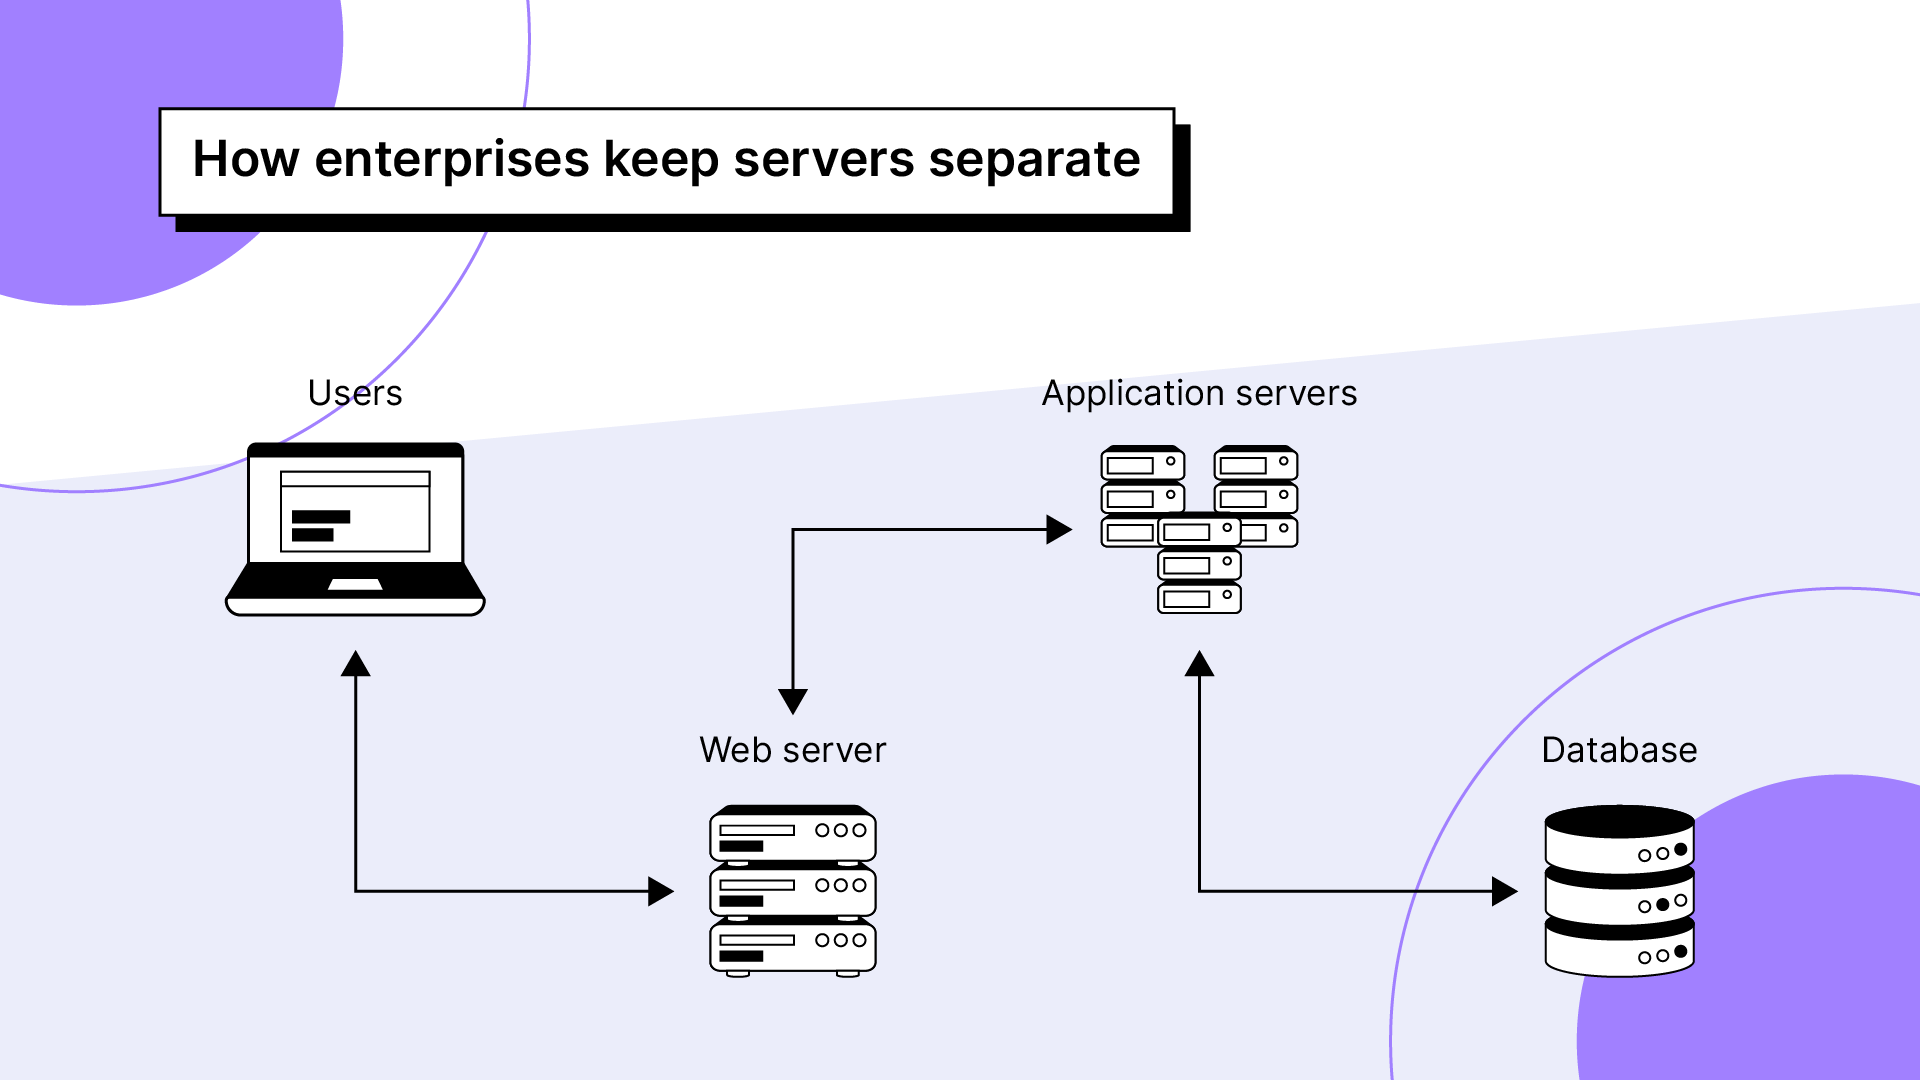 Separating database servers and application servers enhances security.